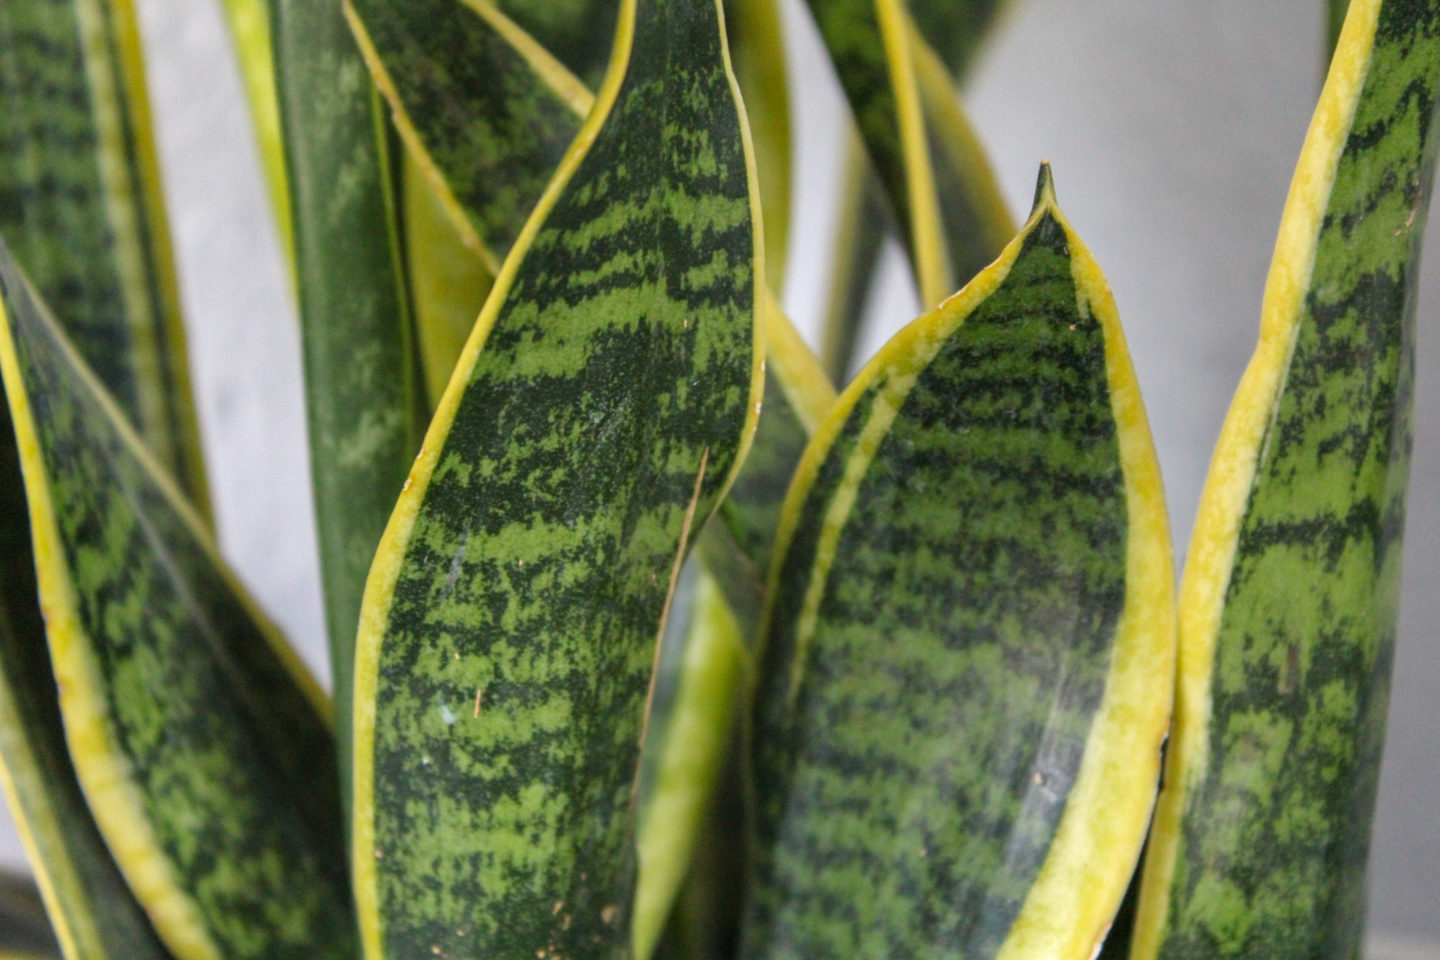 House plants for Beginners: The sansevieria. One of the best houseplants for beginners